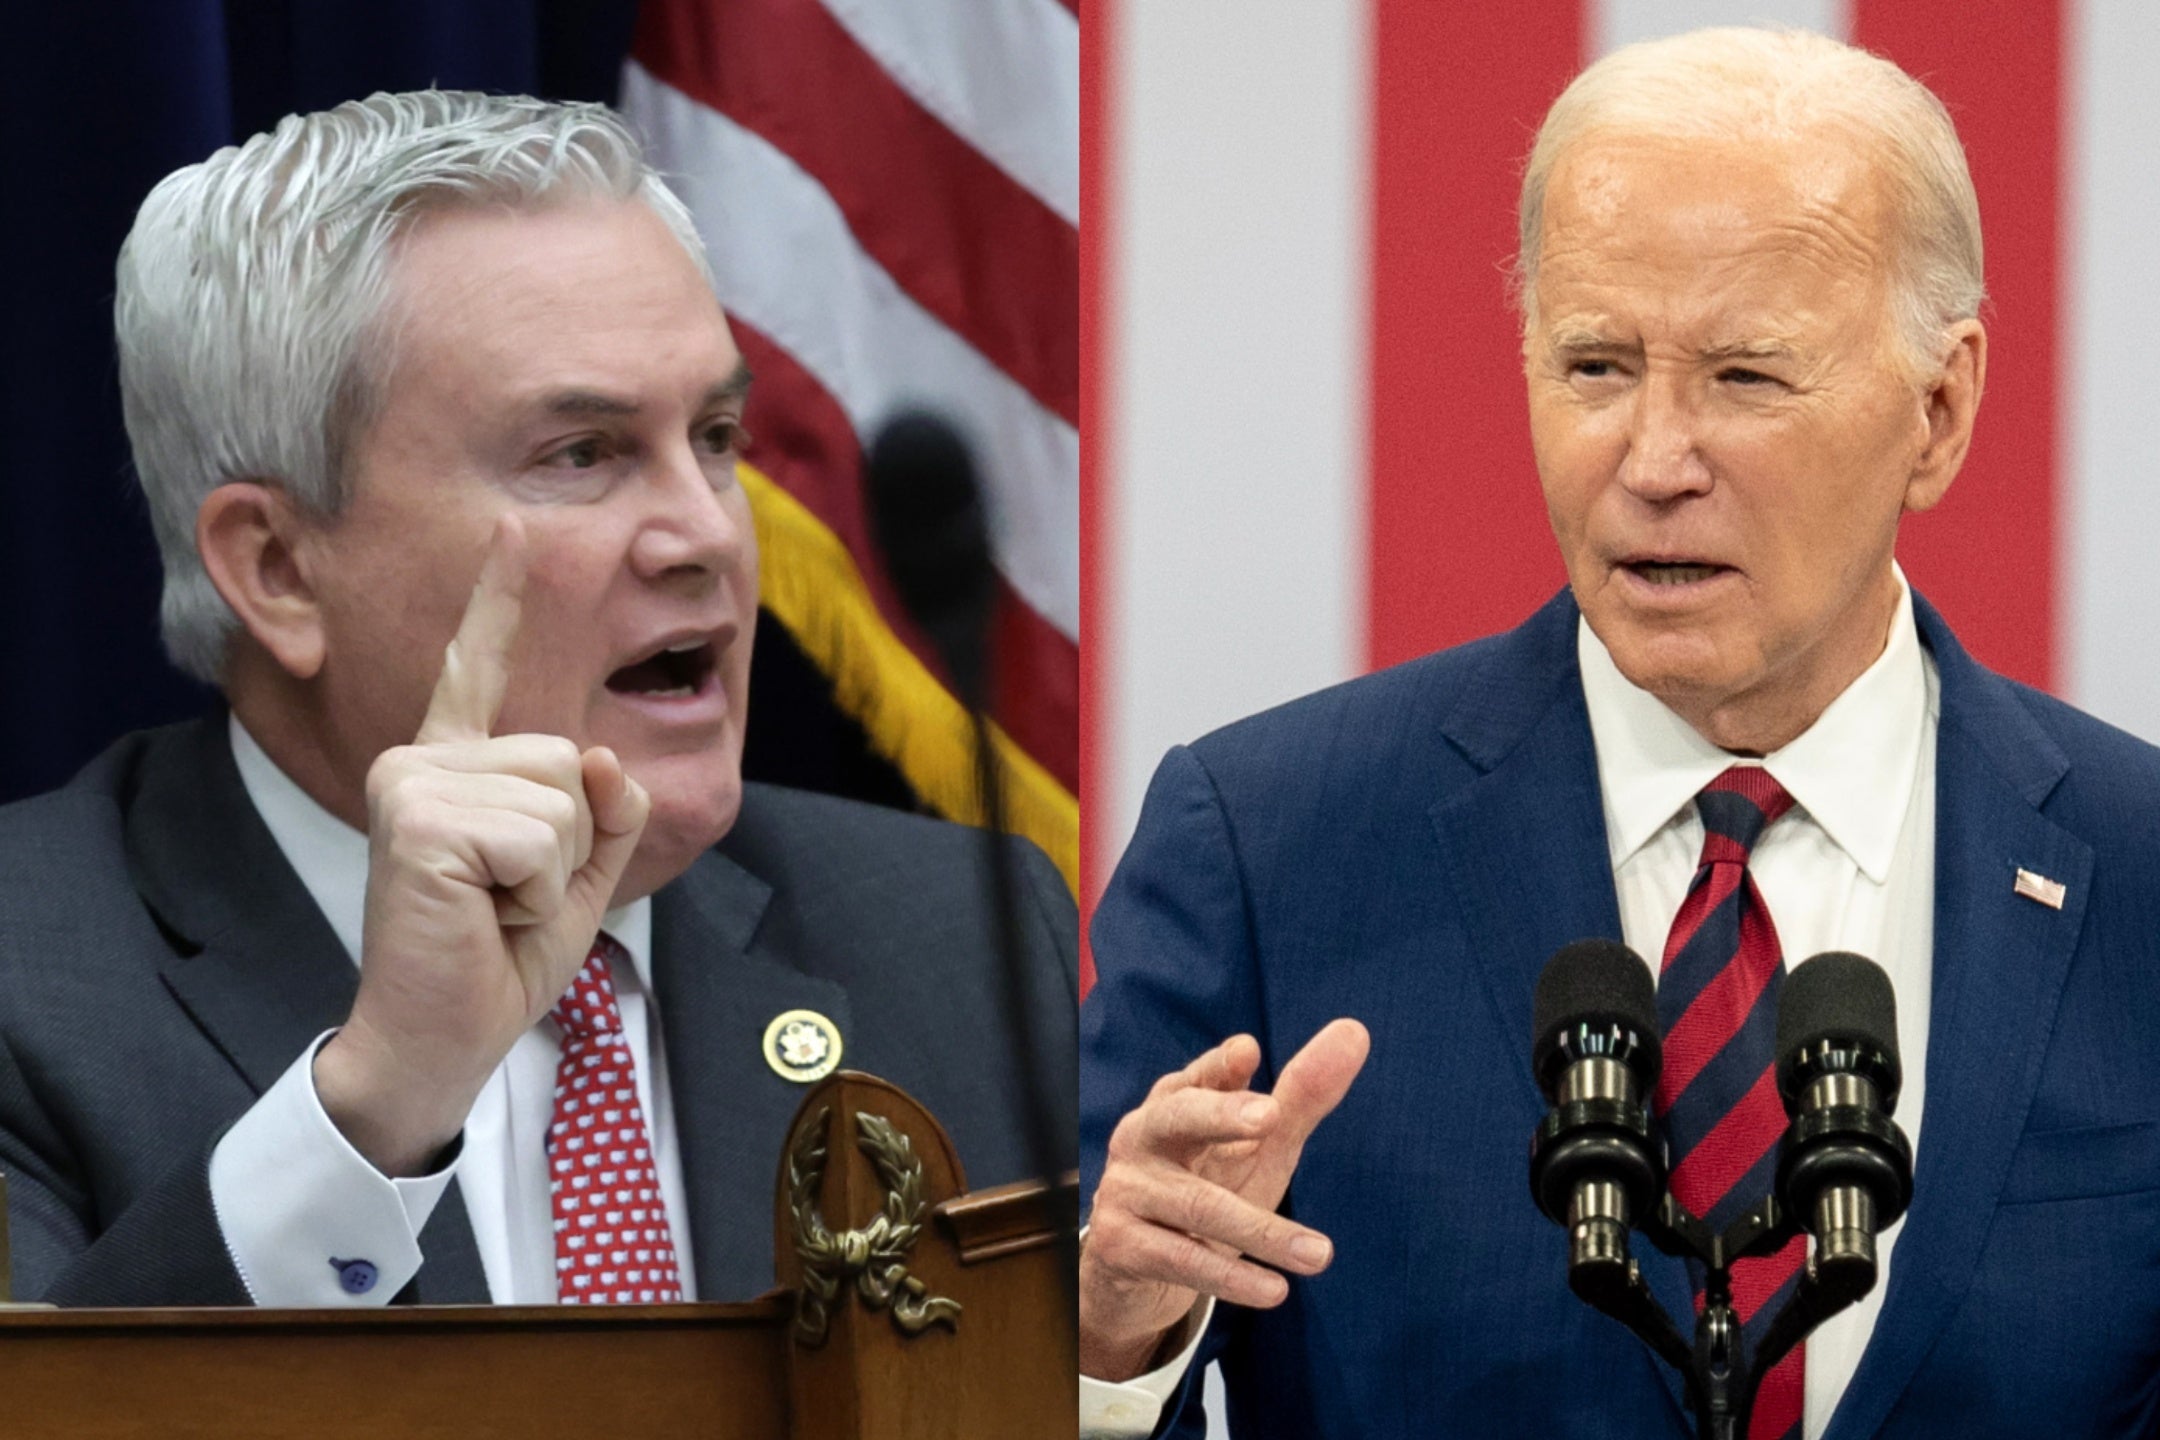 house hearing turns into chaos as republican chairman challenged over biden ‘corruption’ smear: ‘no, you need therapy!’